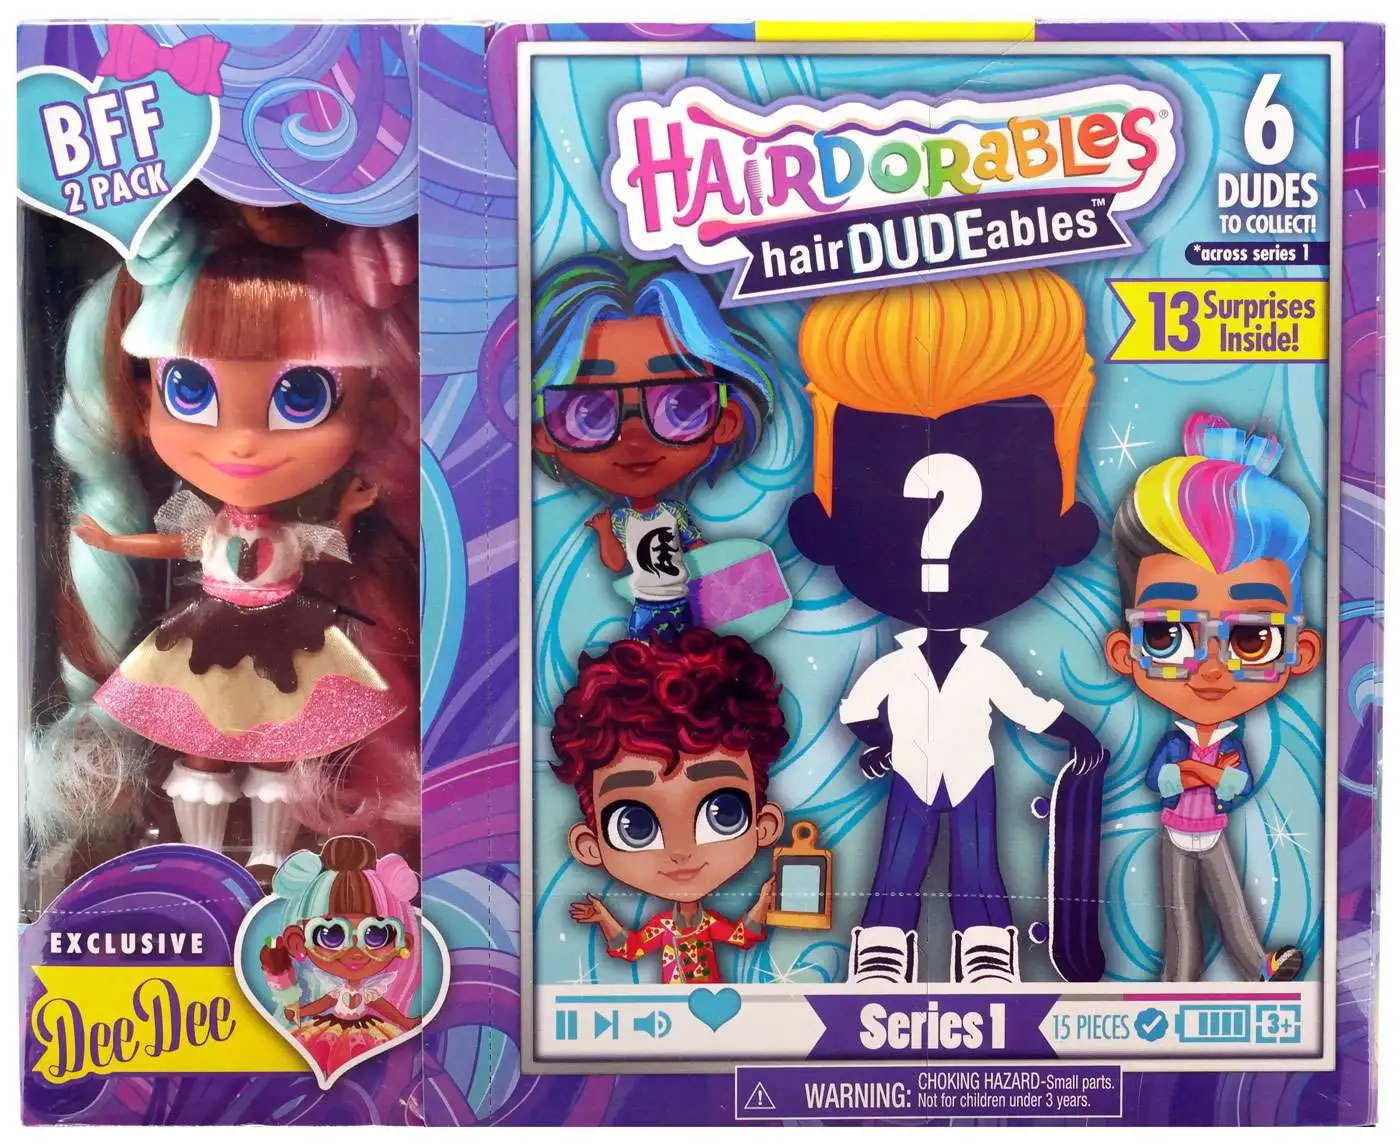 Hairdorables Hairdudeables Series 3 Pack Brand New 